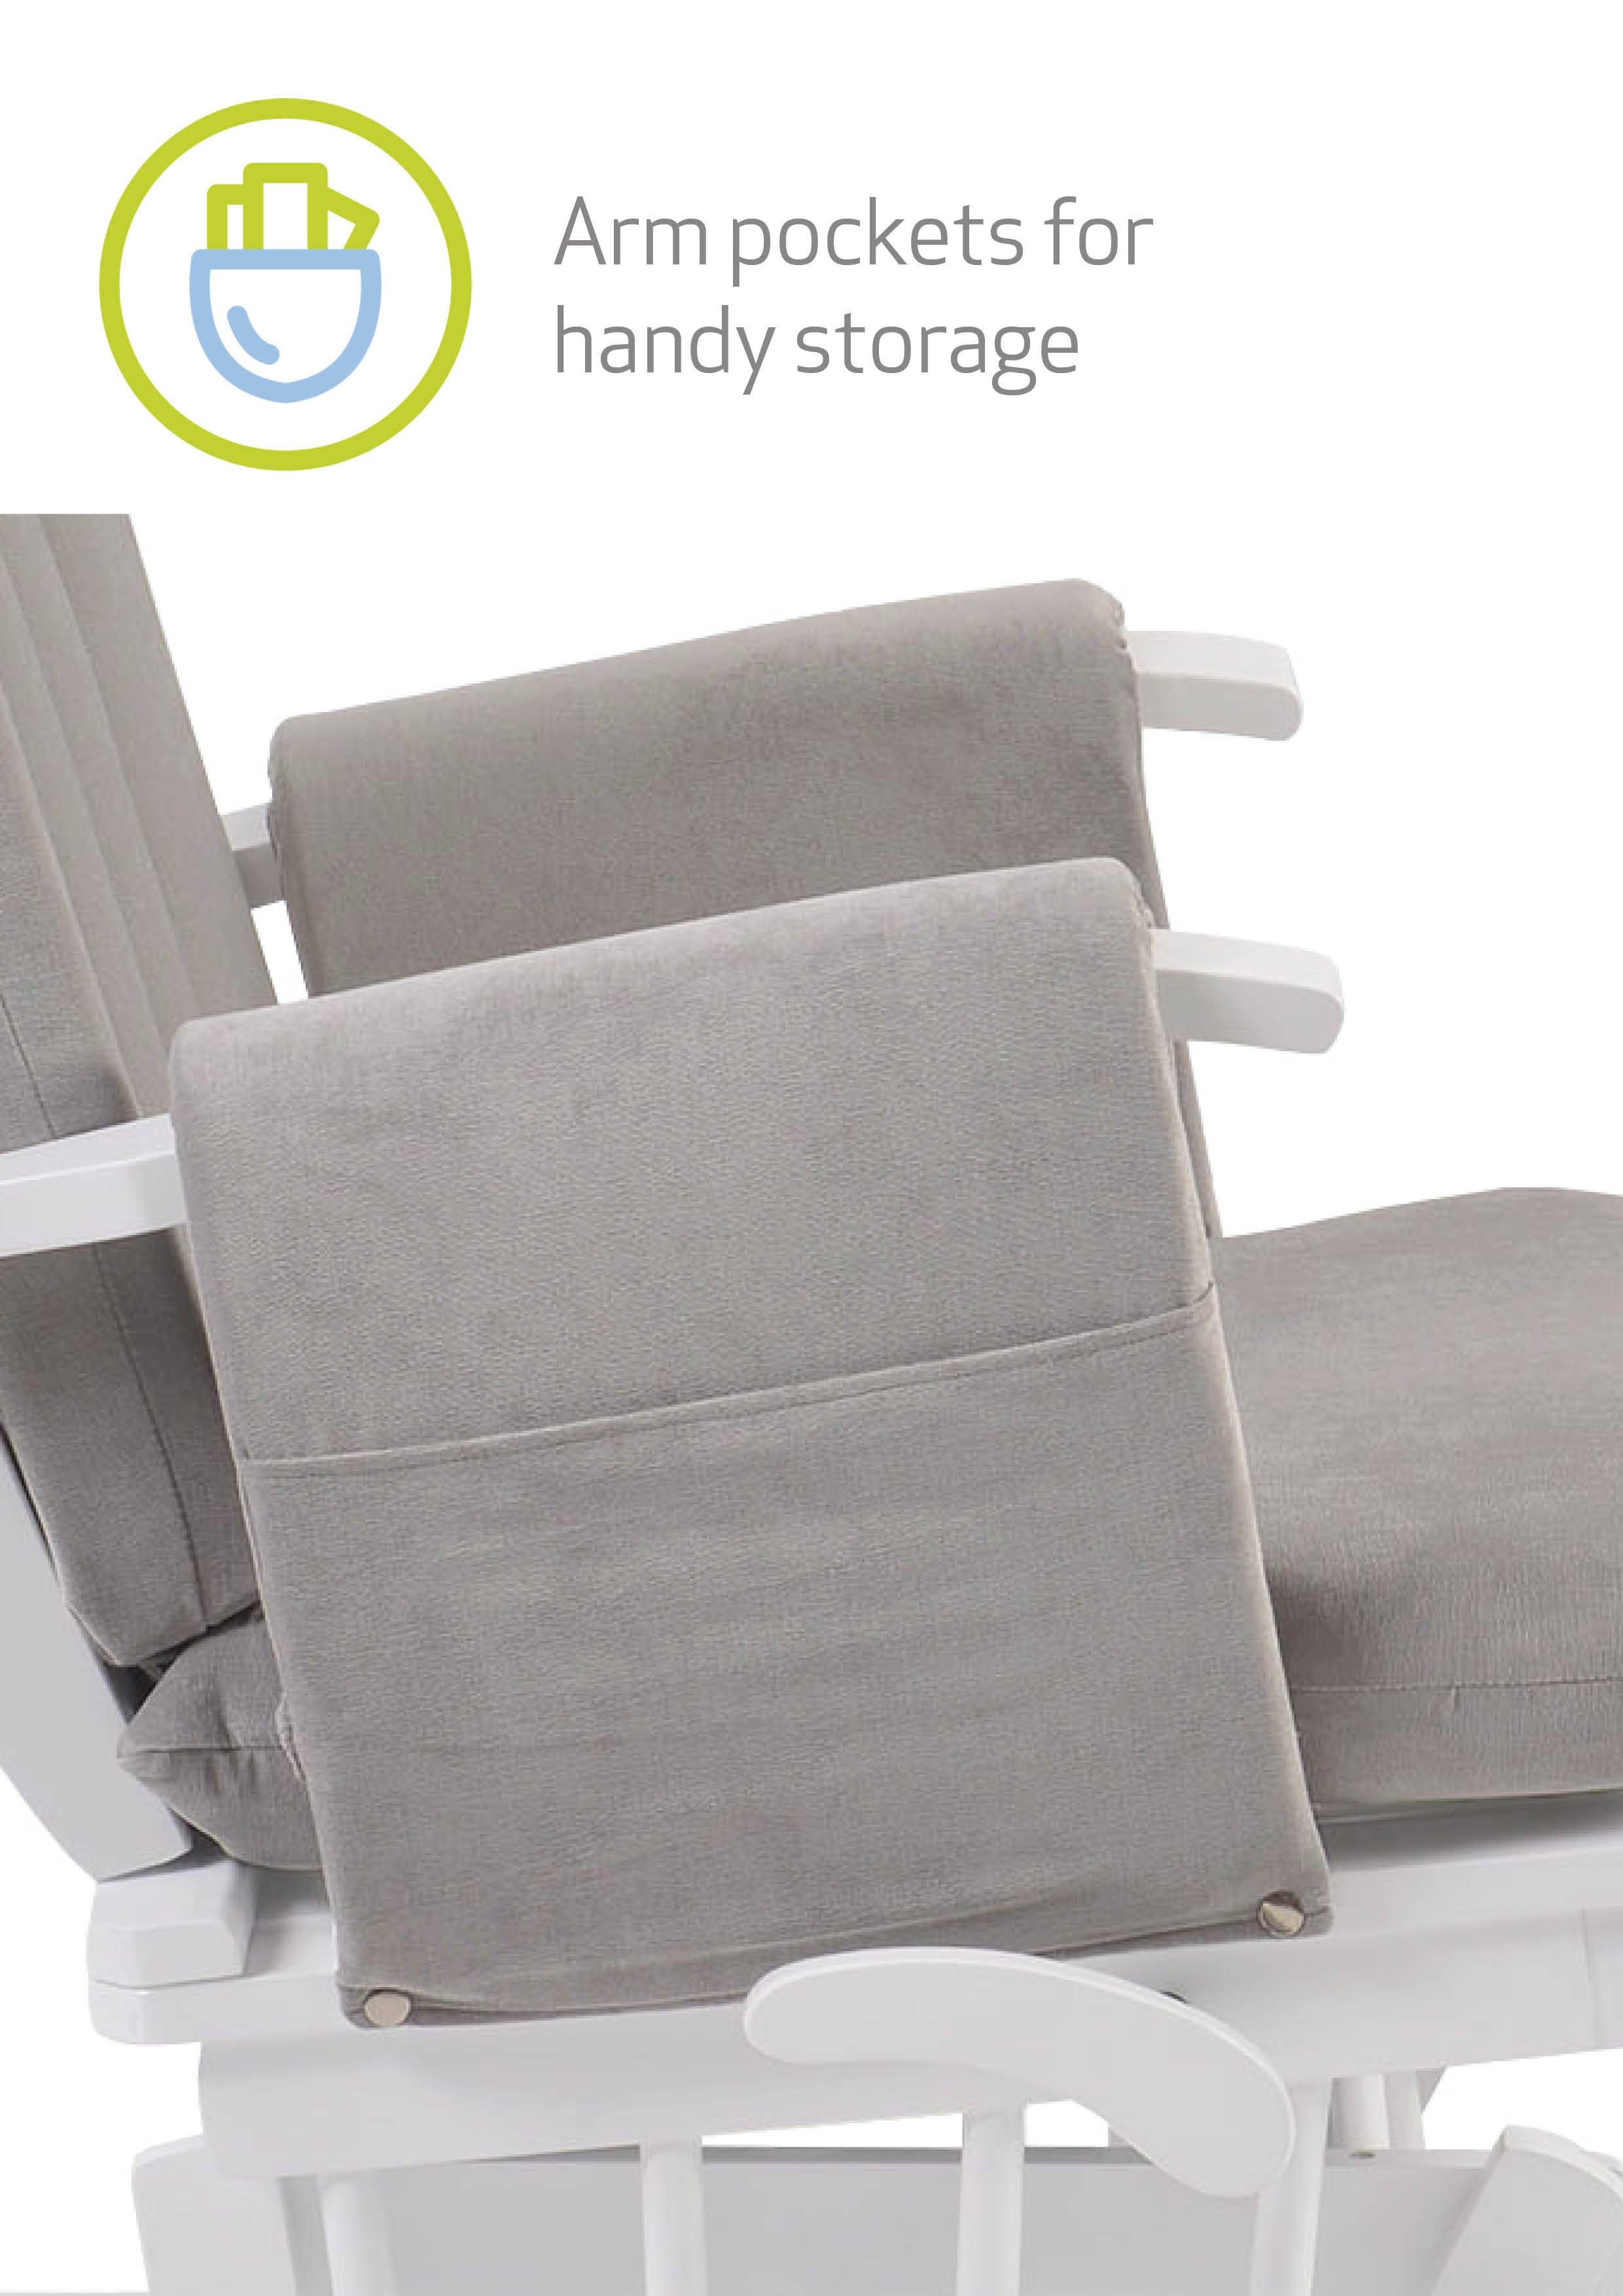 Chatsworth Nursing Chair and Footstool - 50% OFF